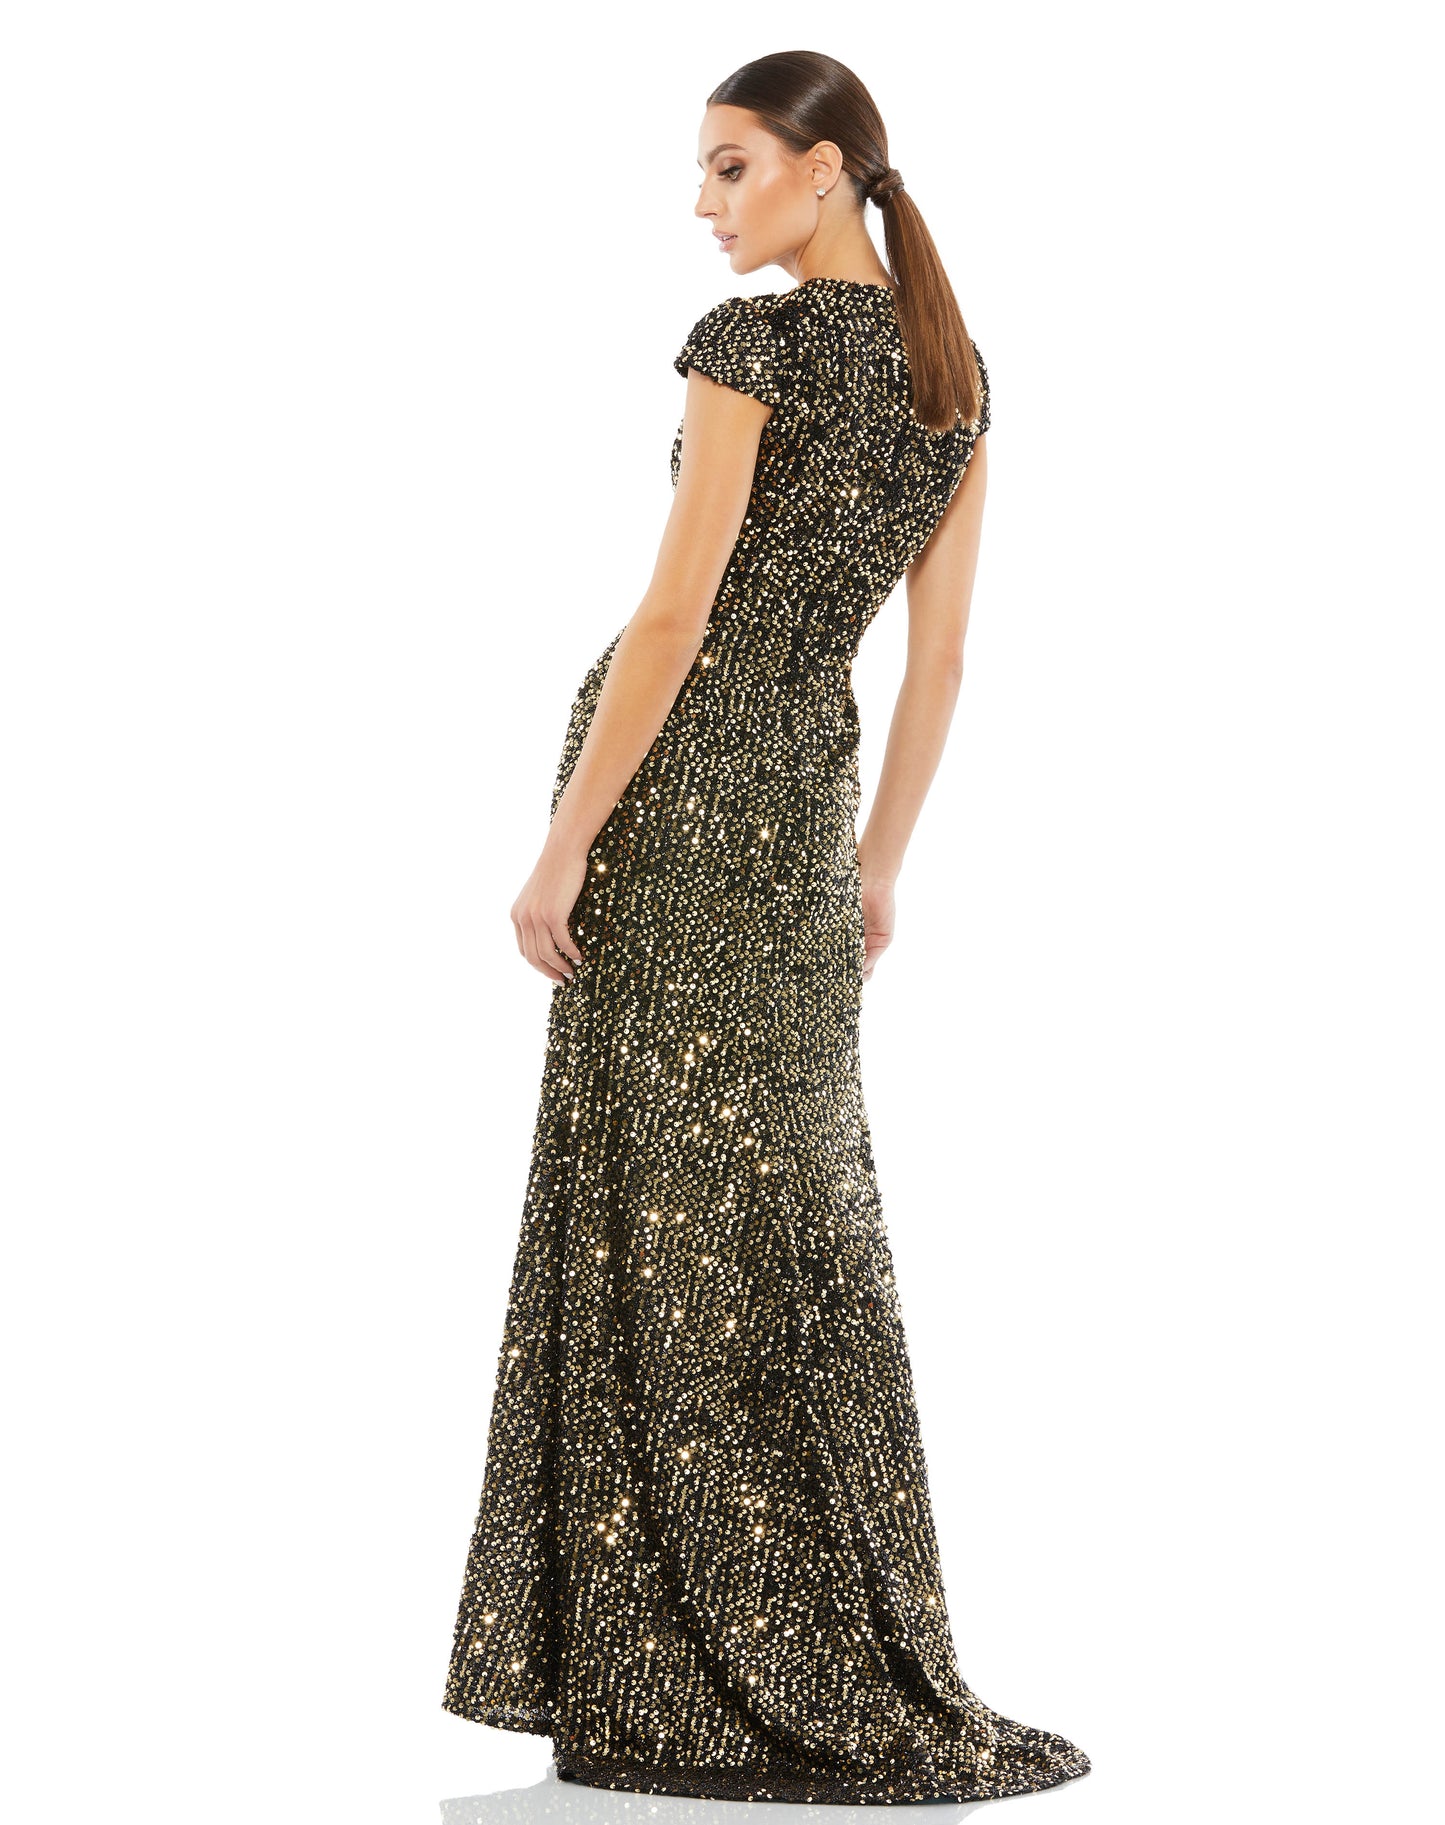 Nothing to wear? When you want to dress to impress, turn to this mini-paillette-embellished gown. The gorgeous gown is textured with scintillating sequins from head to toe and styled with a jewel neckline, cap sleeves, and a sweep train finish. Ieena for